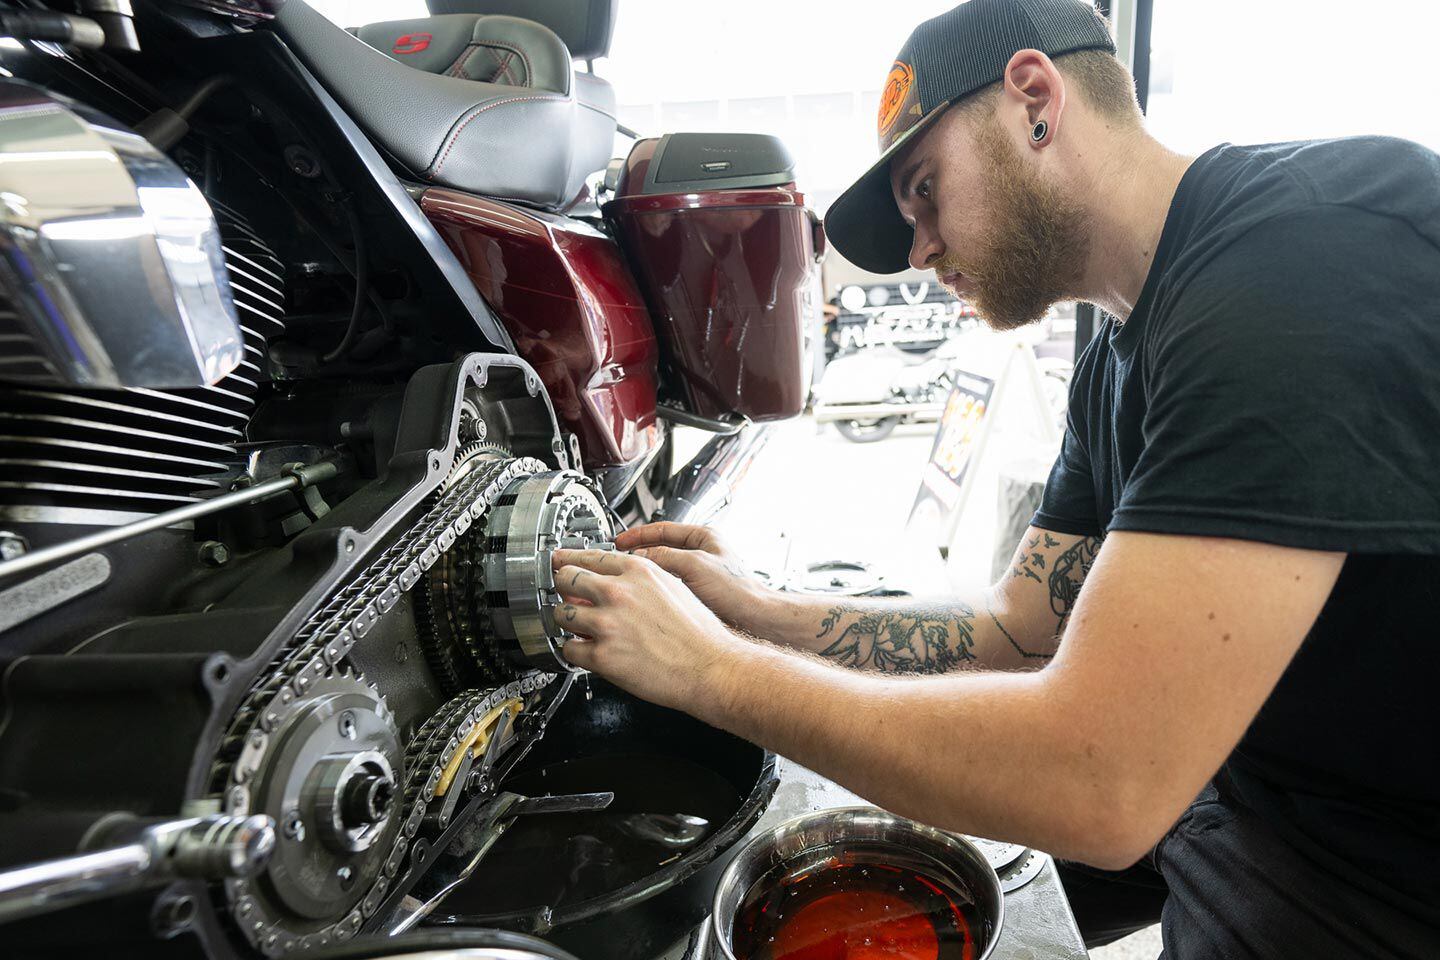 Some work so that others may party. Mechanic Kaleb Fletcher working on a clutch at the Cycle Solutions activation at Daytona Harley-Davidson.